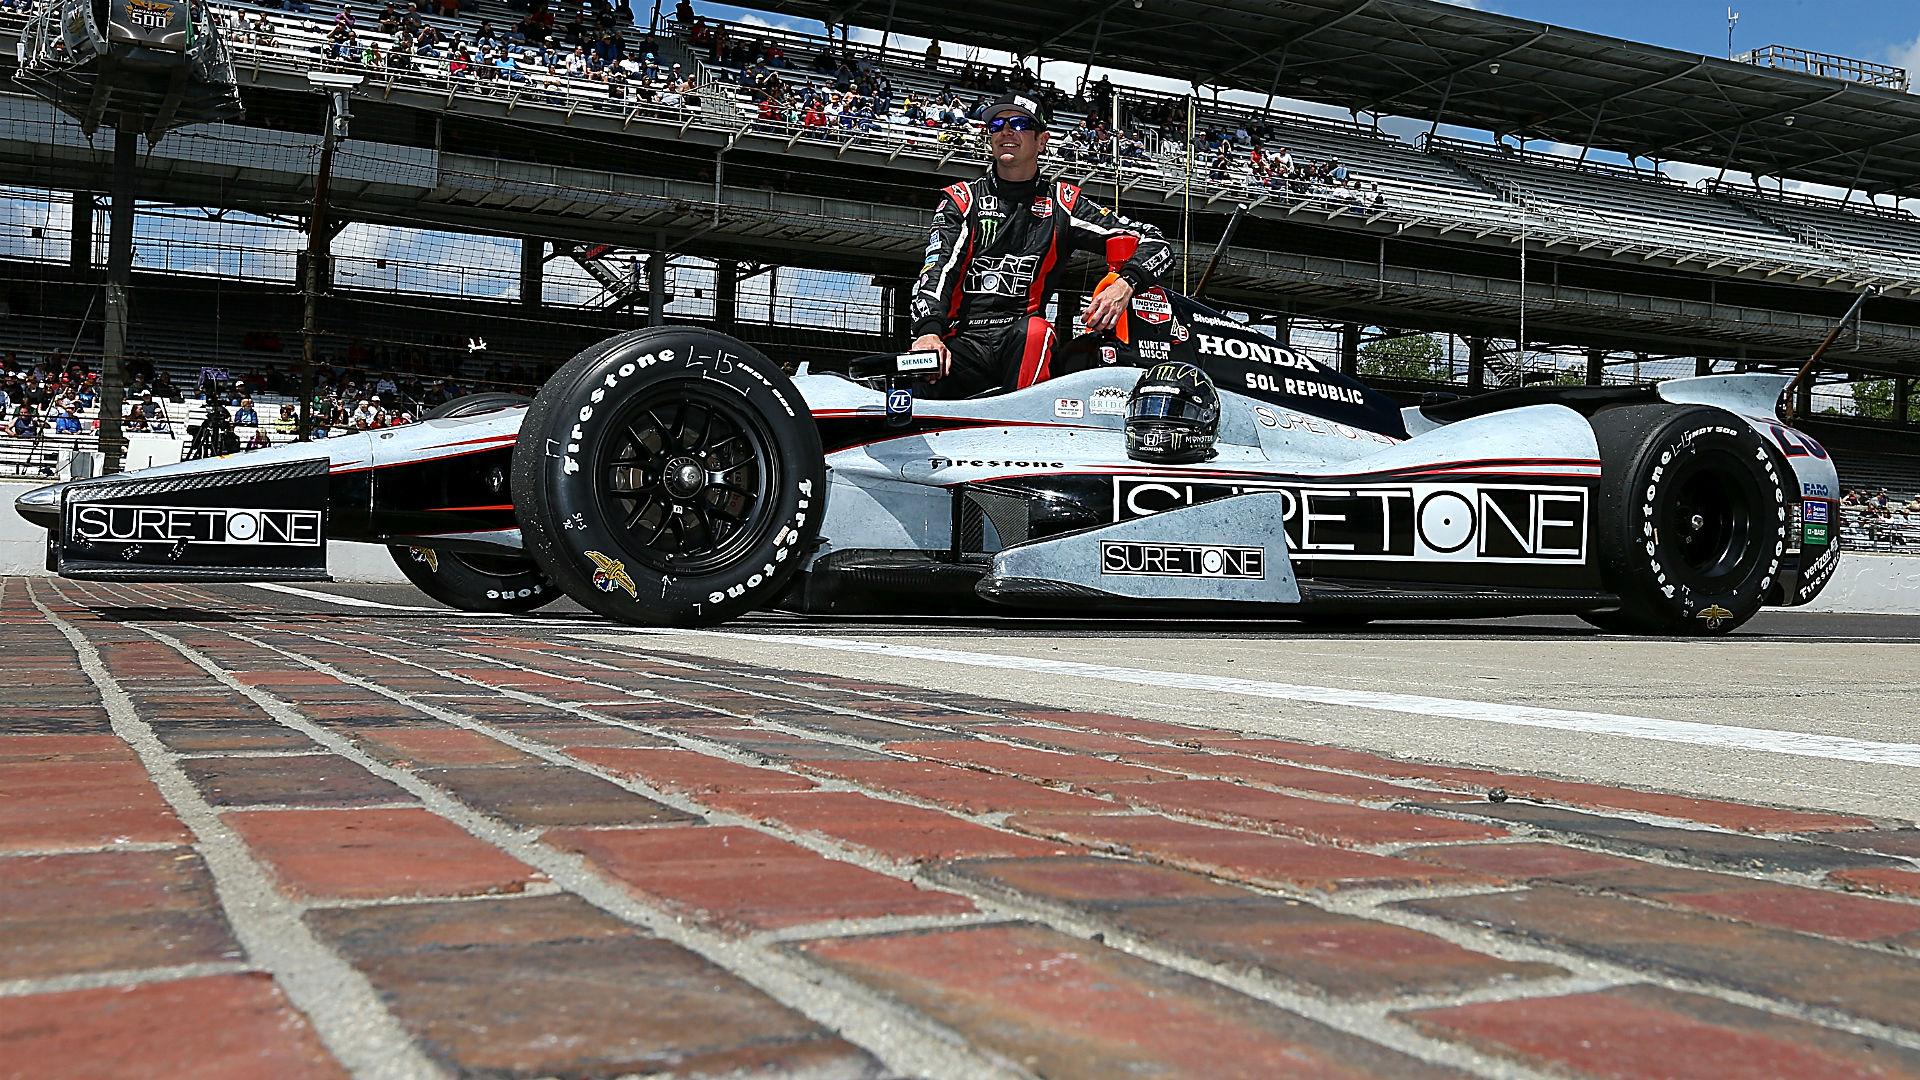 Indy 500 wallpaper Gallery